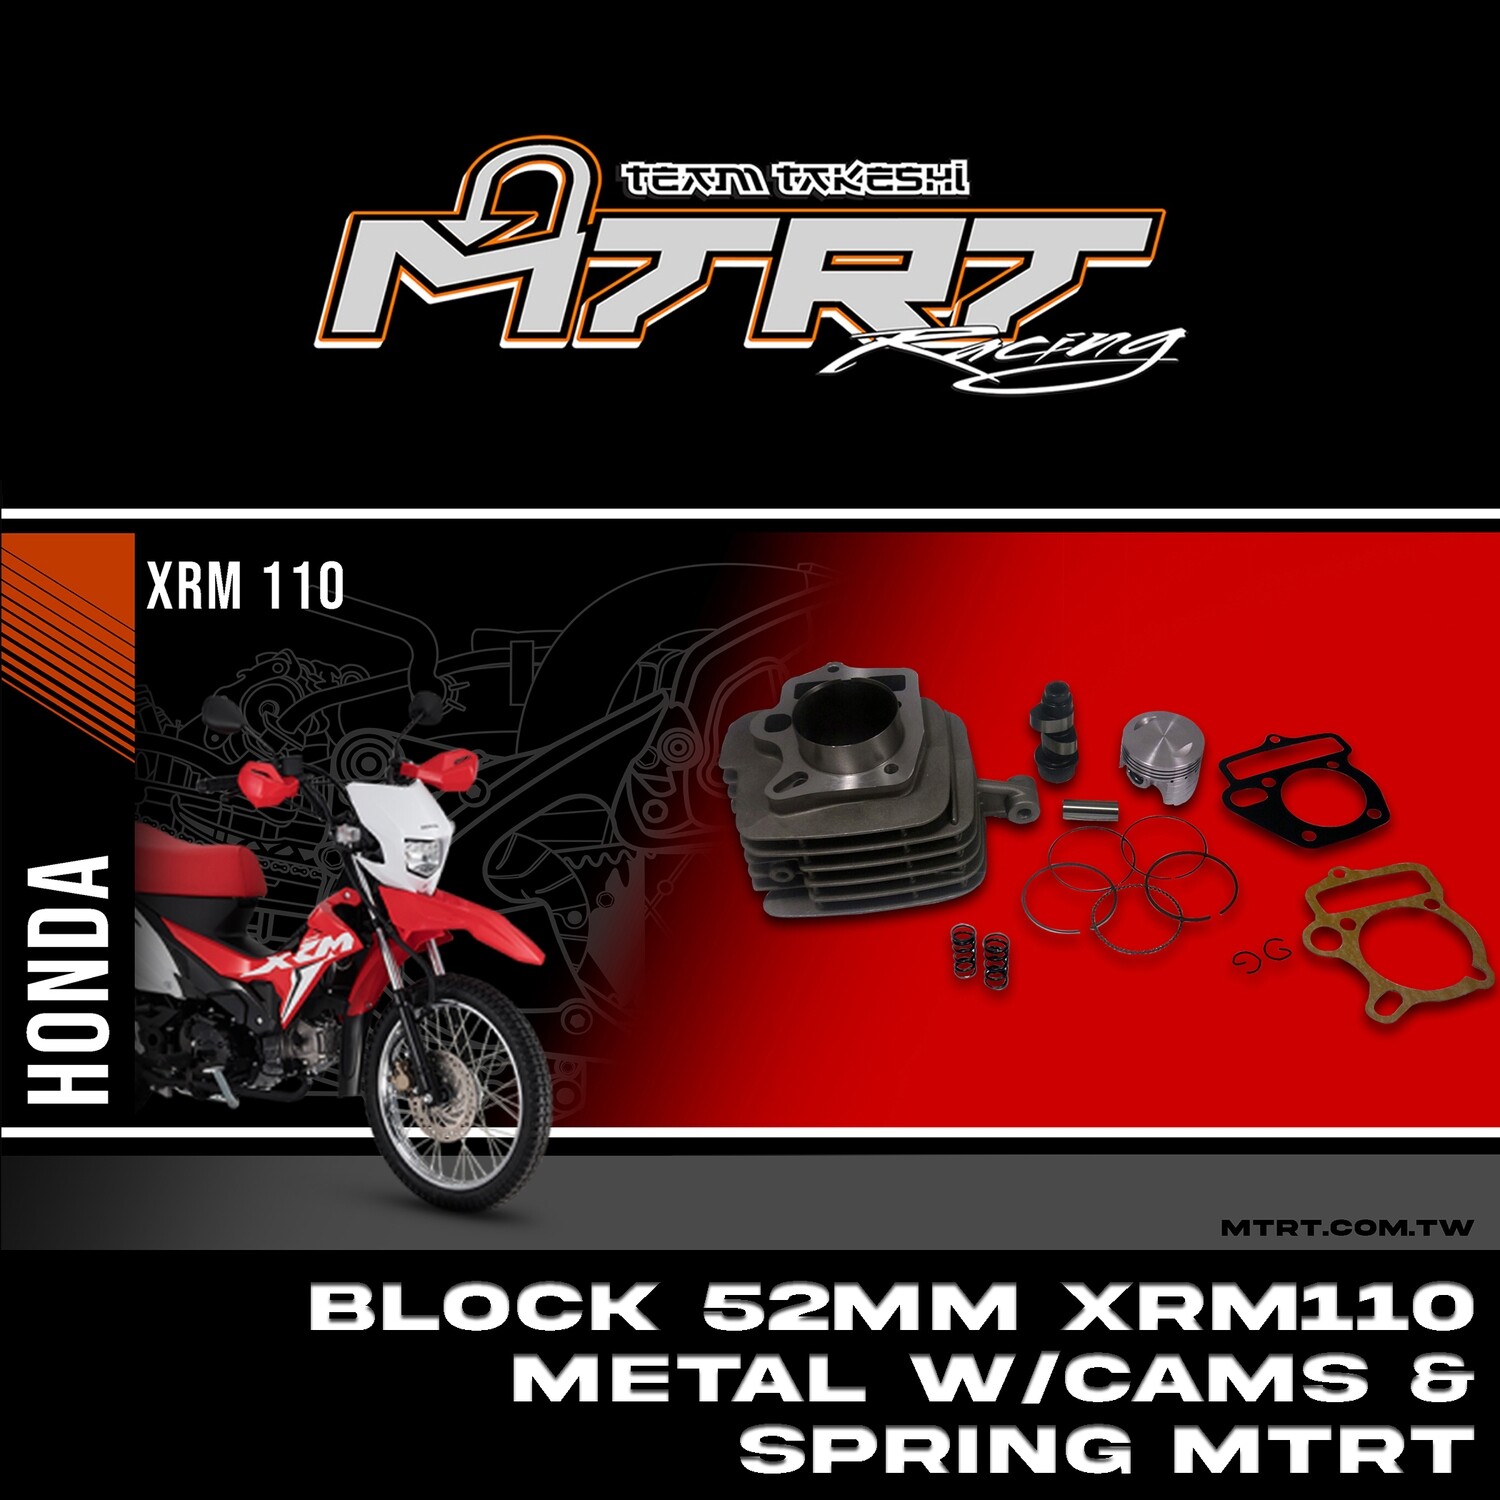 BLOCK 52MM XRM110 METAL Semi dome W/ cams and valve spring MTRT